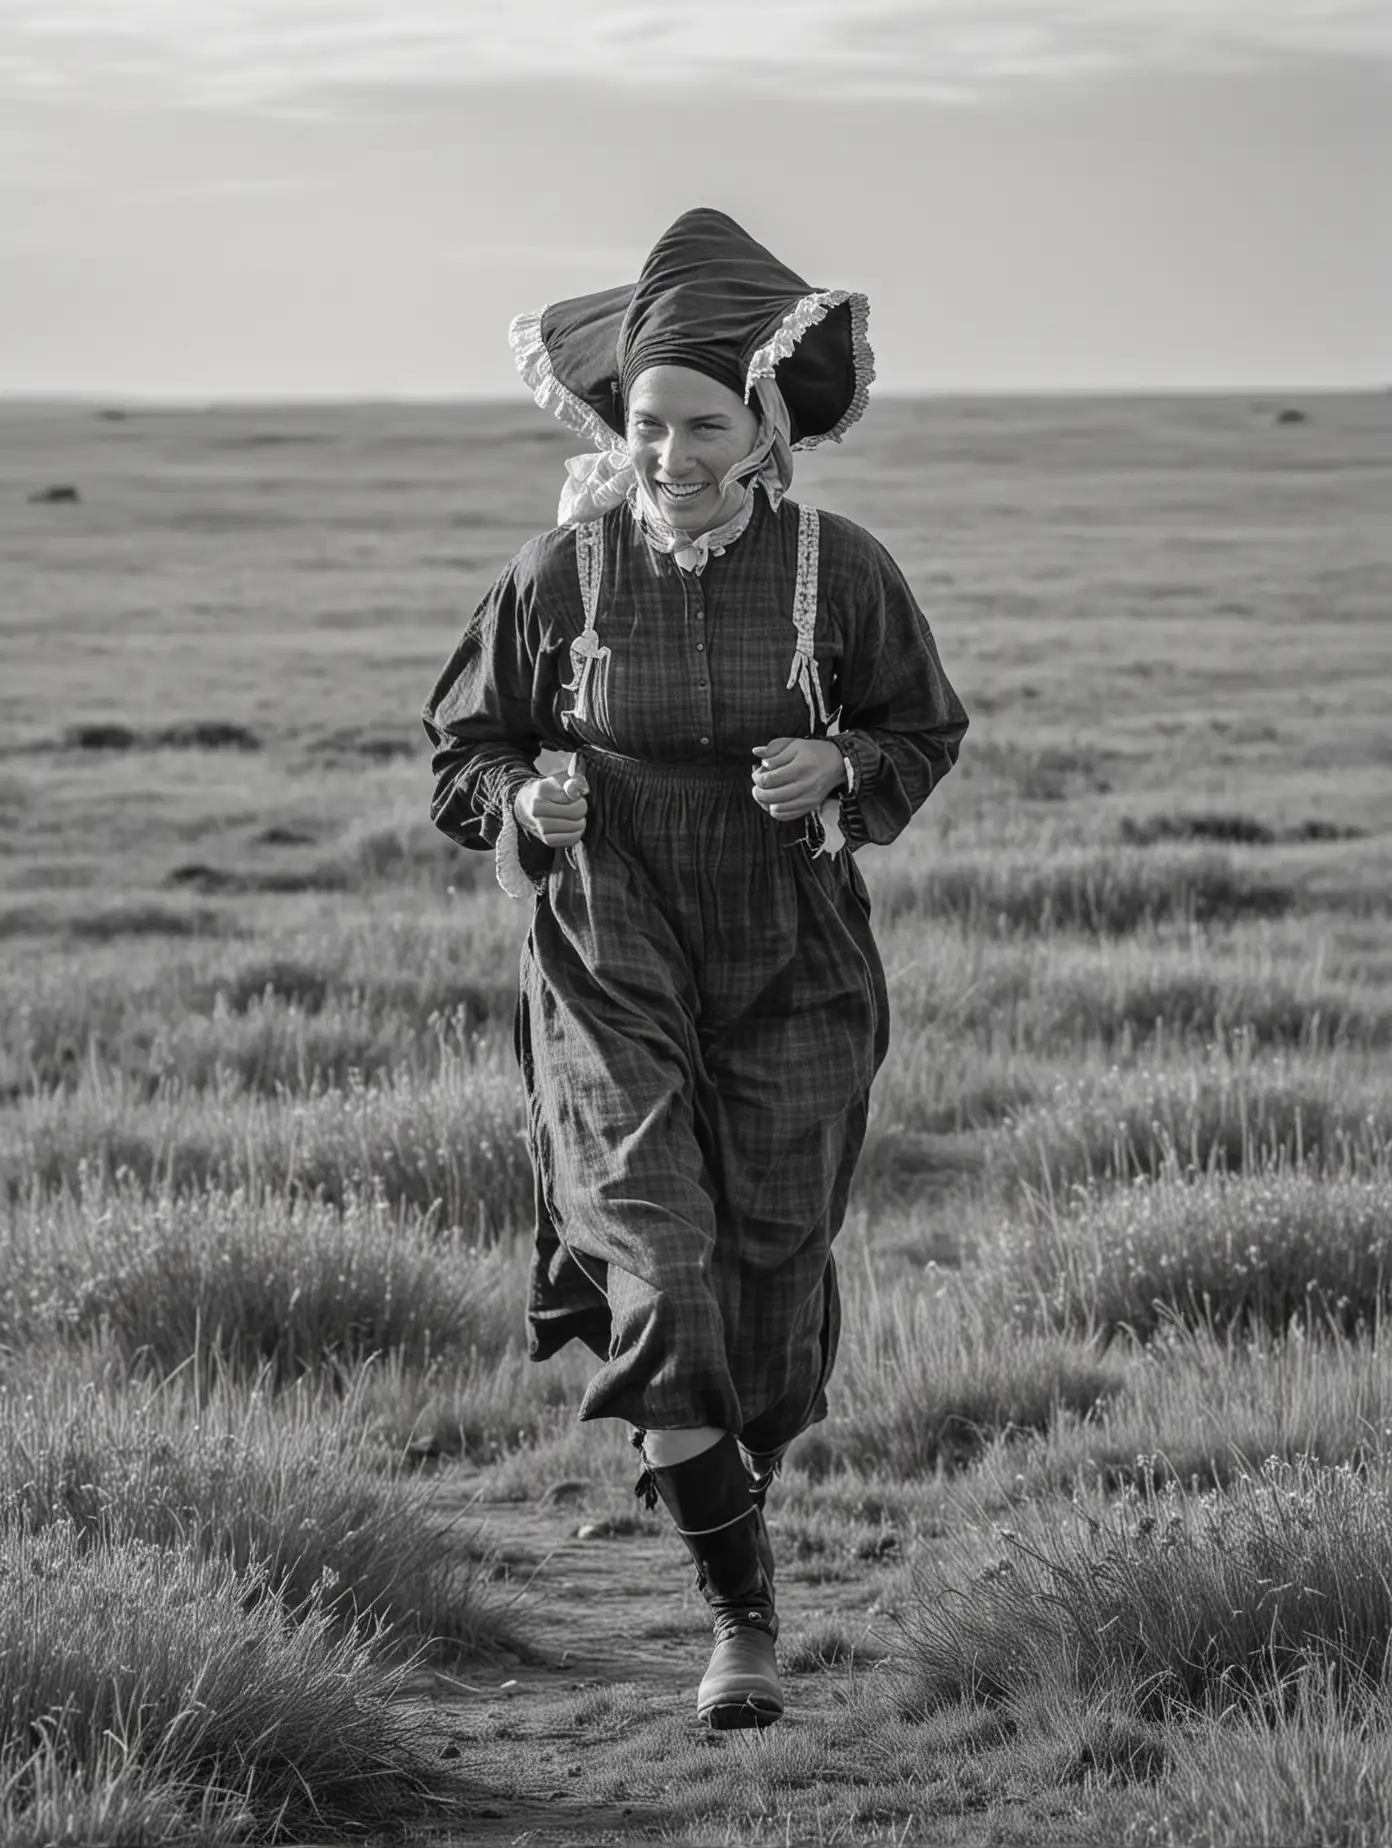 Pioneer Woman Running through Prairie with Buffalo in Black and White